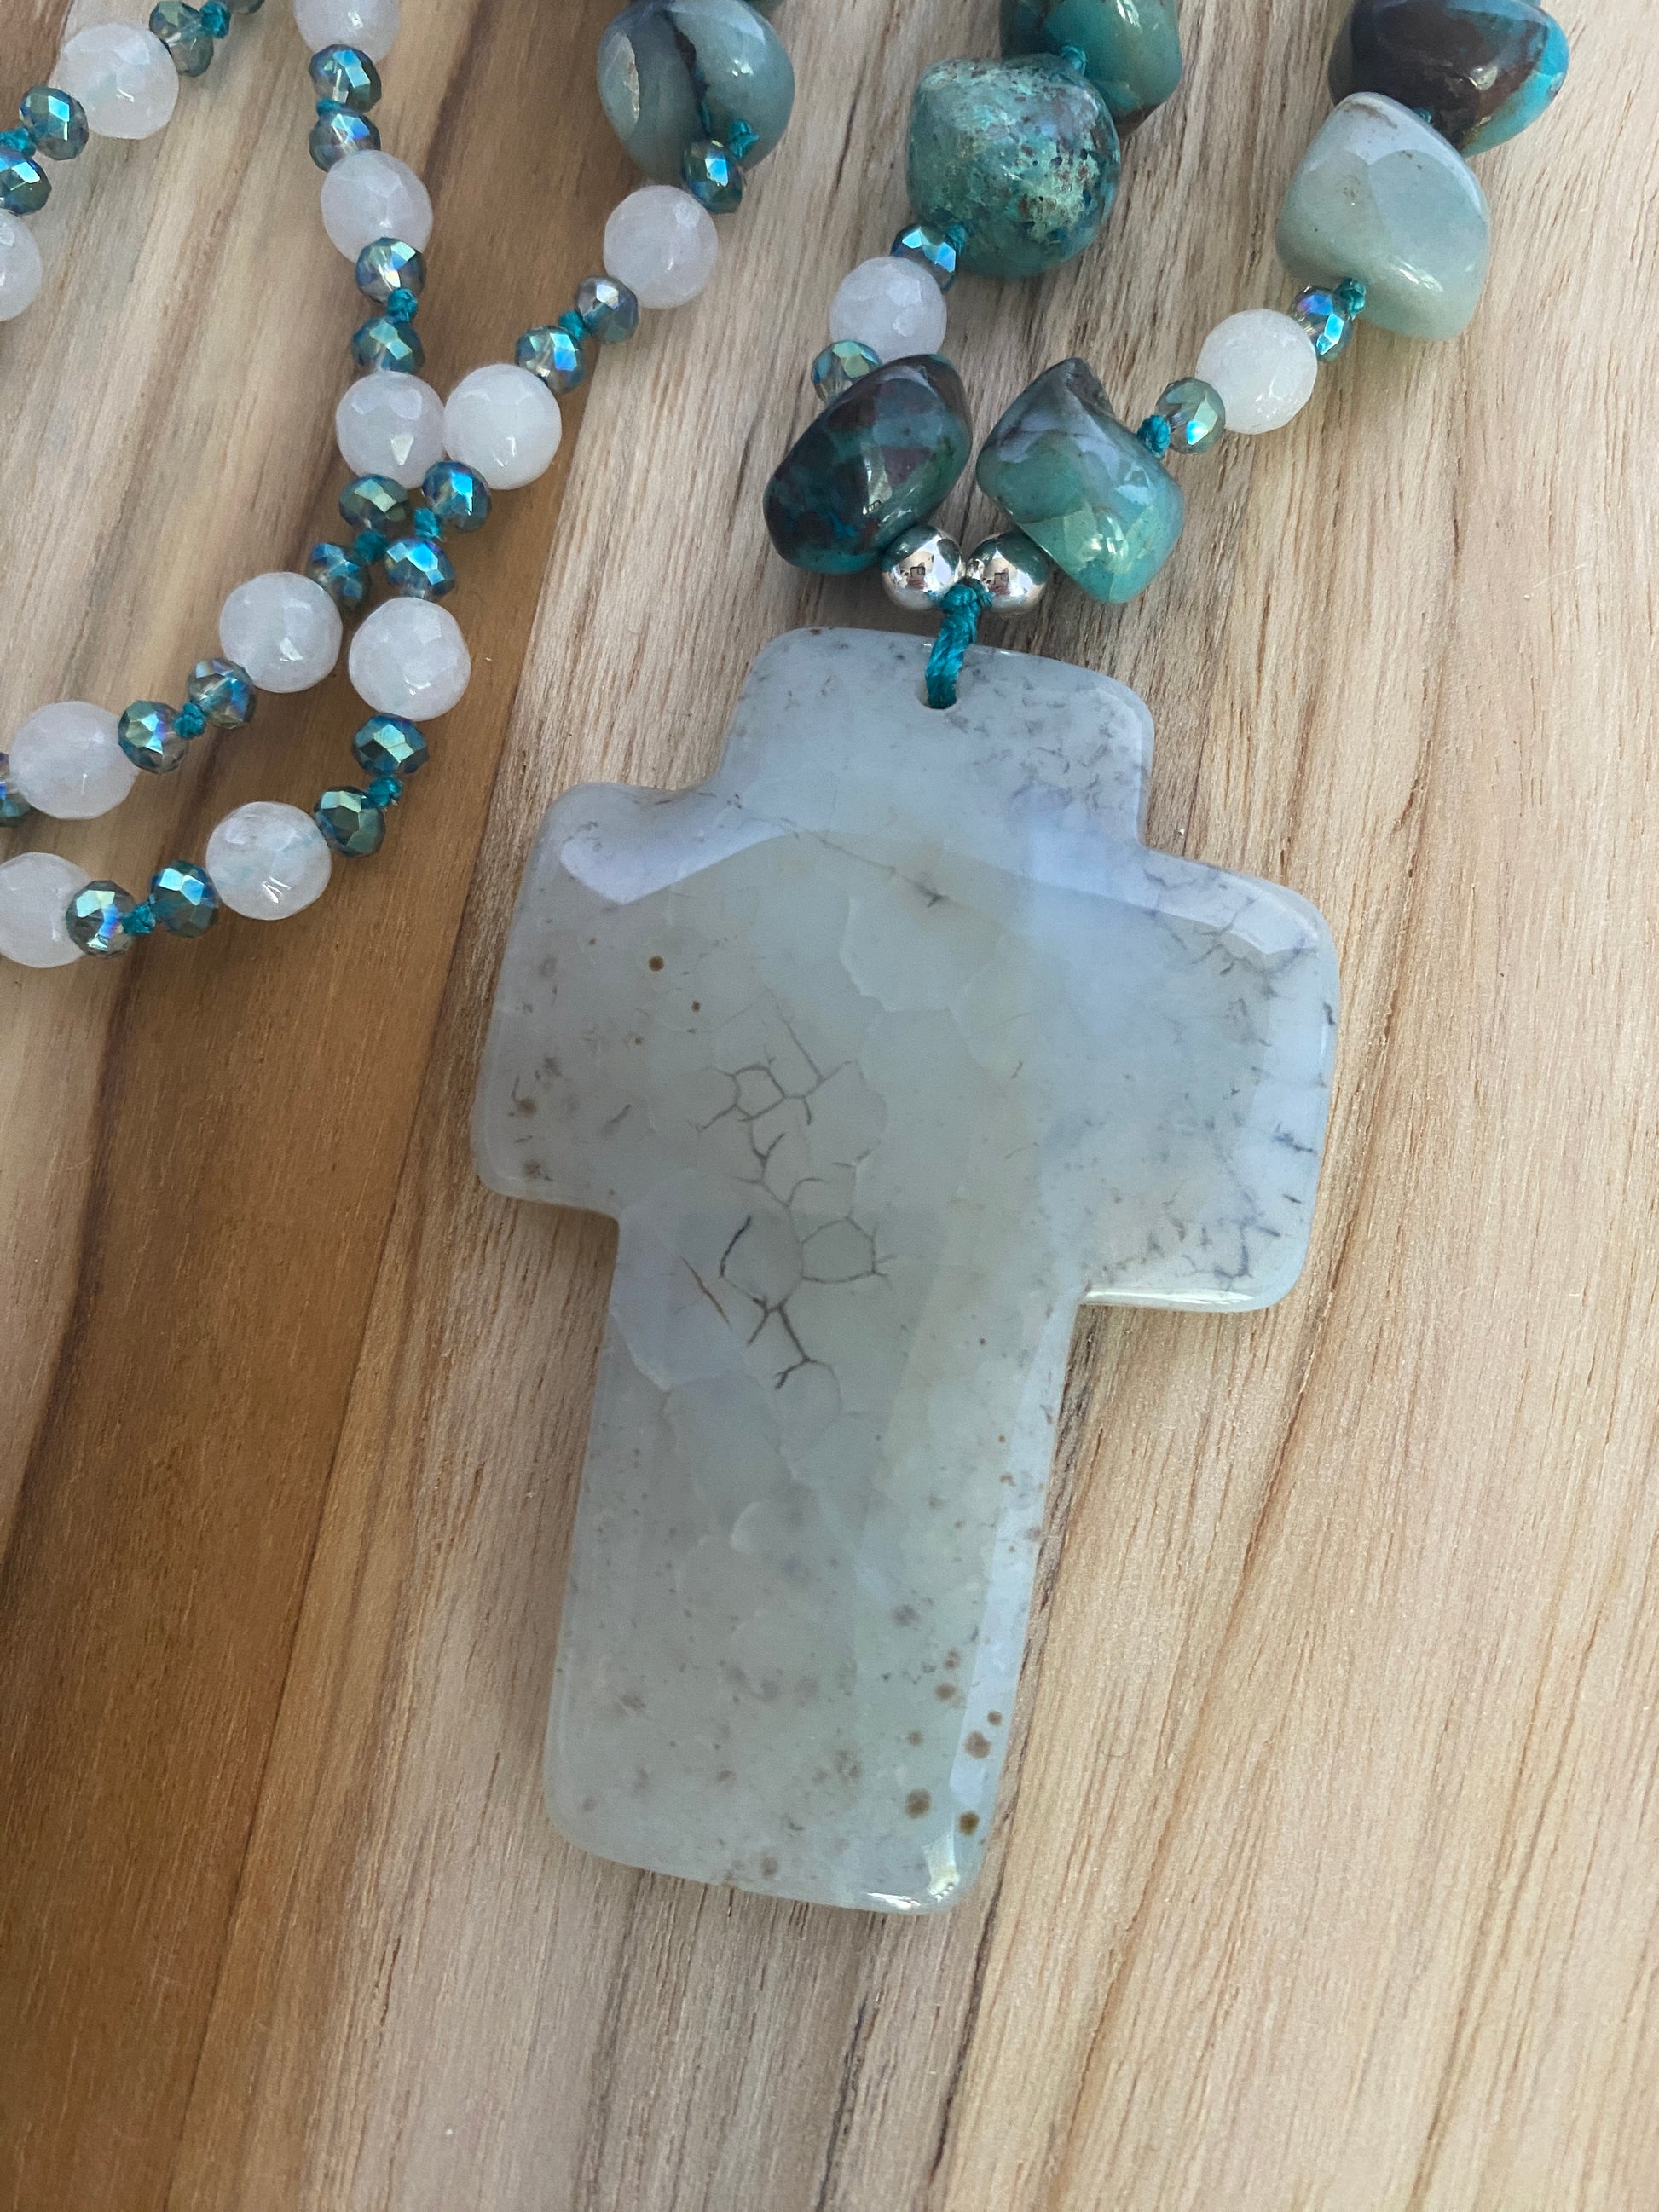 28" Long Light Grey Agate Cross Beaded Necklace with Tumbled Amazonite, Agate & Crystal Beads - My Urban Gems